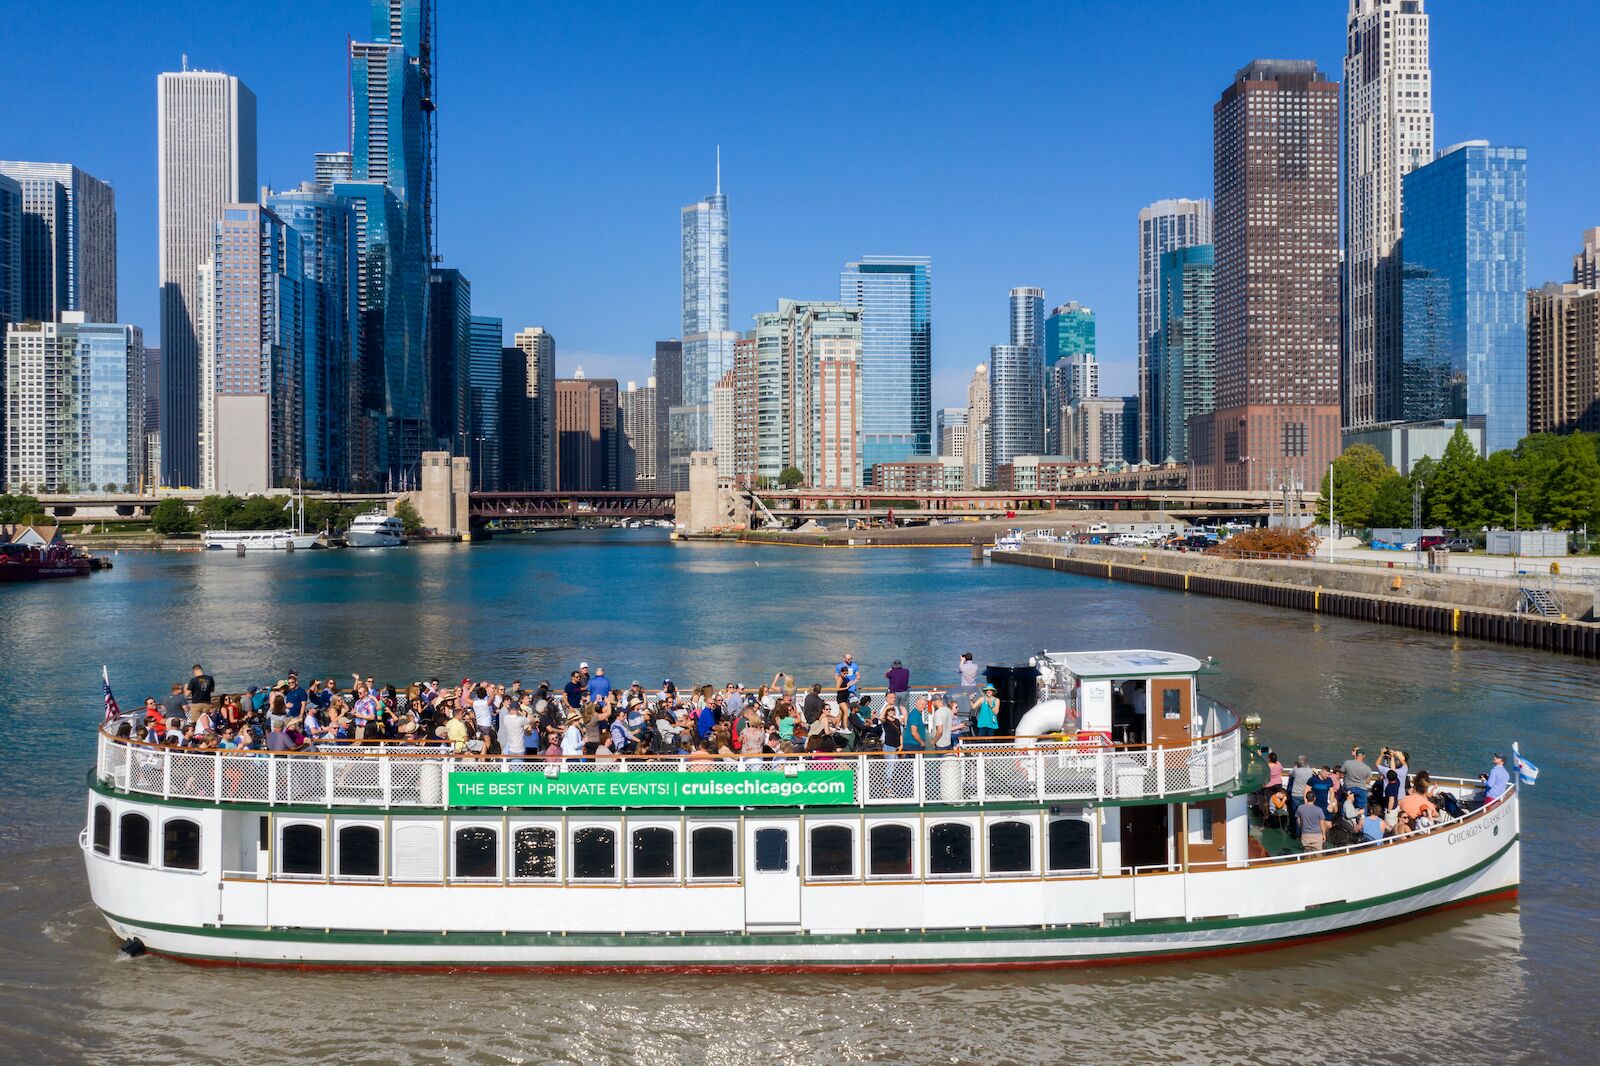 the chicago architecture river cruise boat